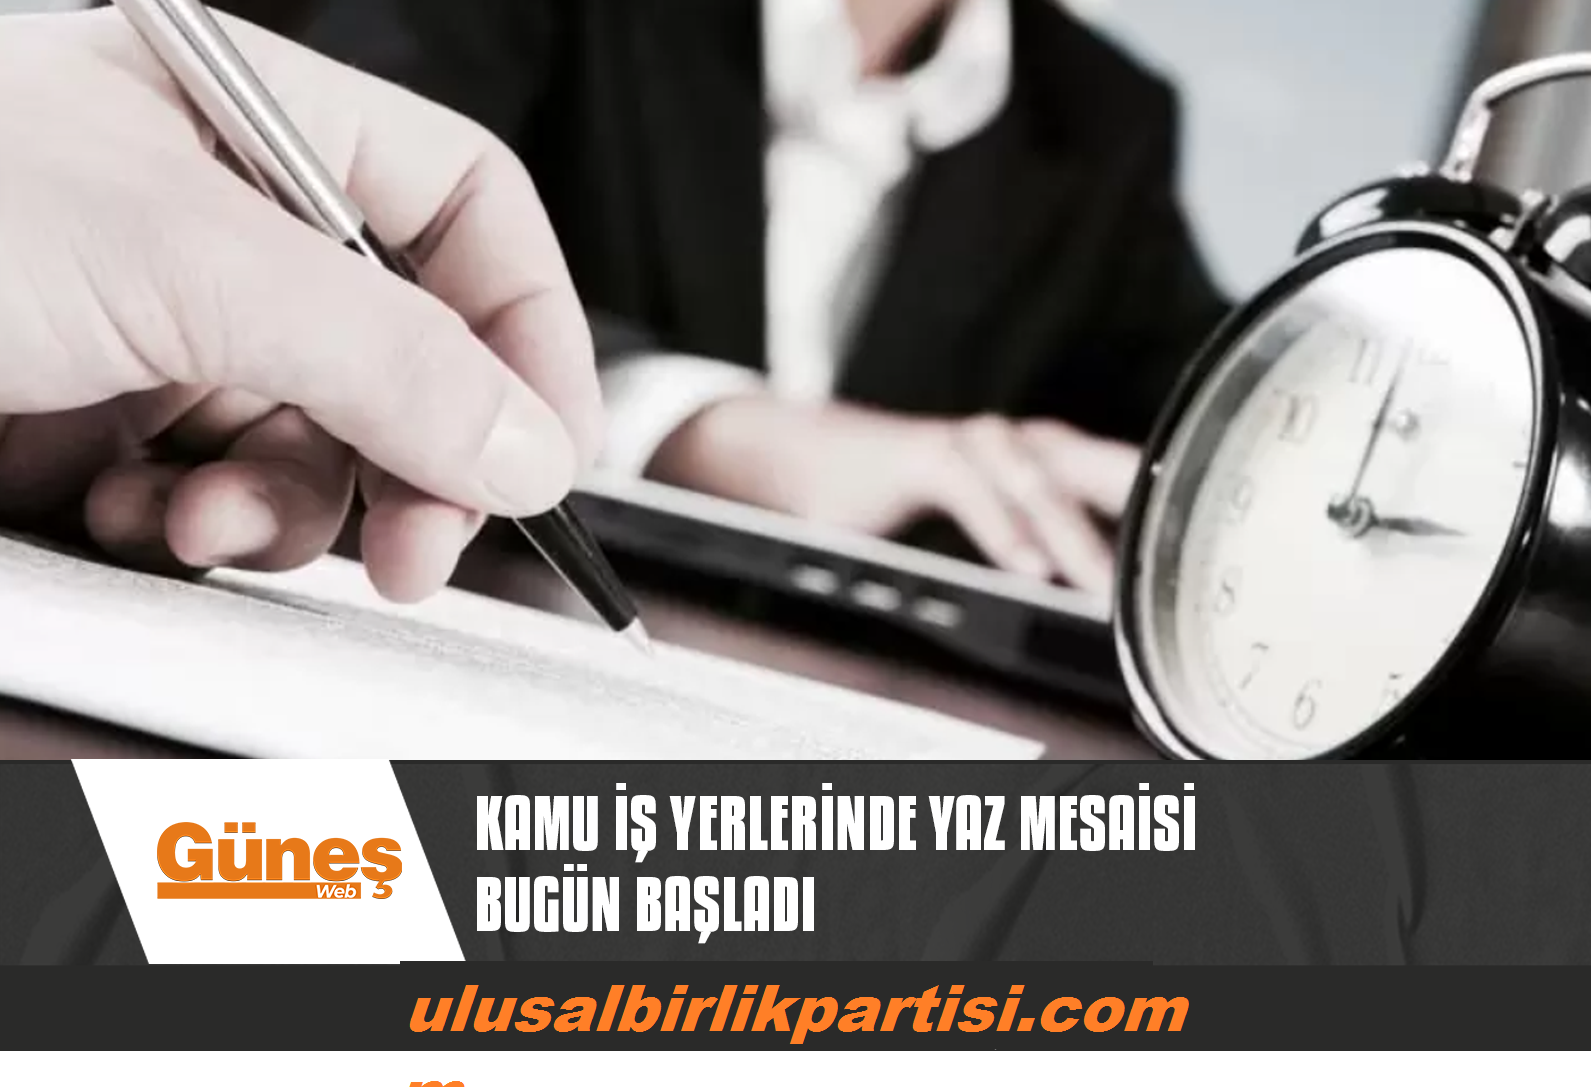 You are currently viewing YAZ MESAİSİ BUGÜN BAŞLADI